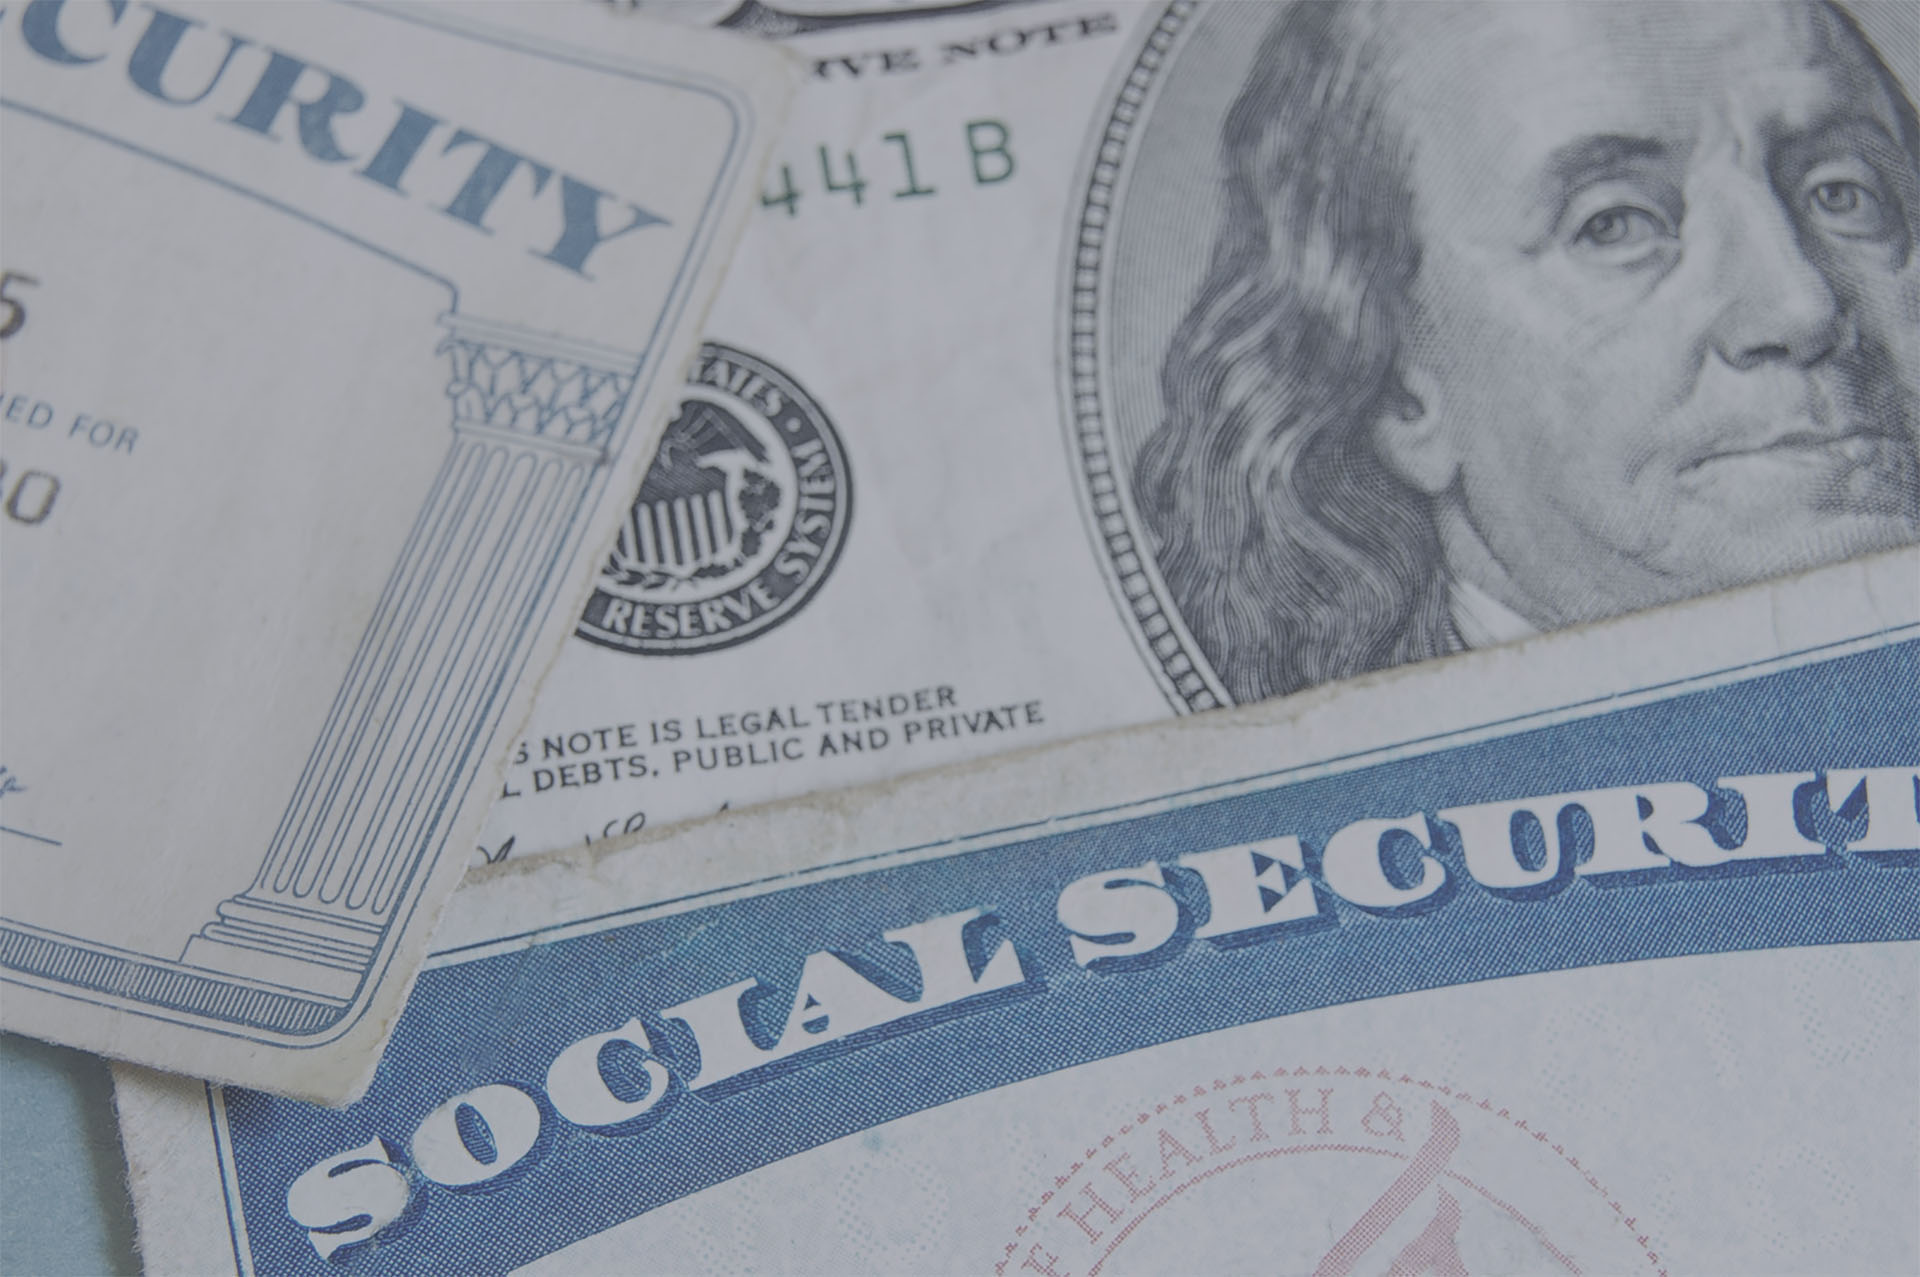 Cash and social security card